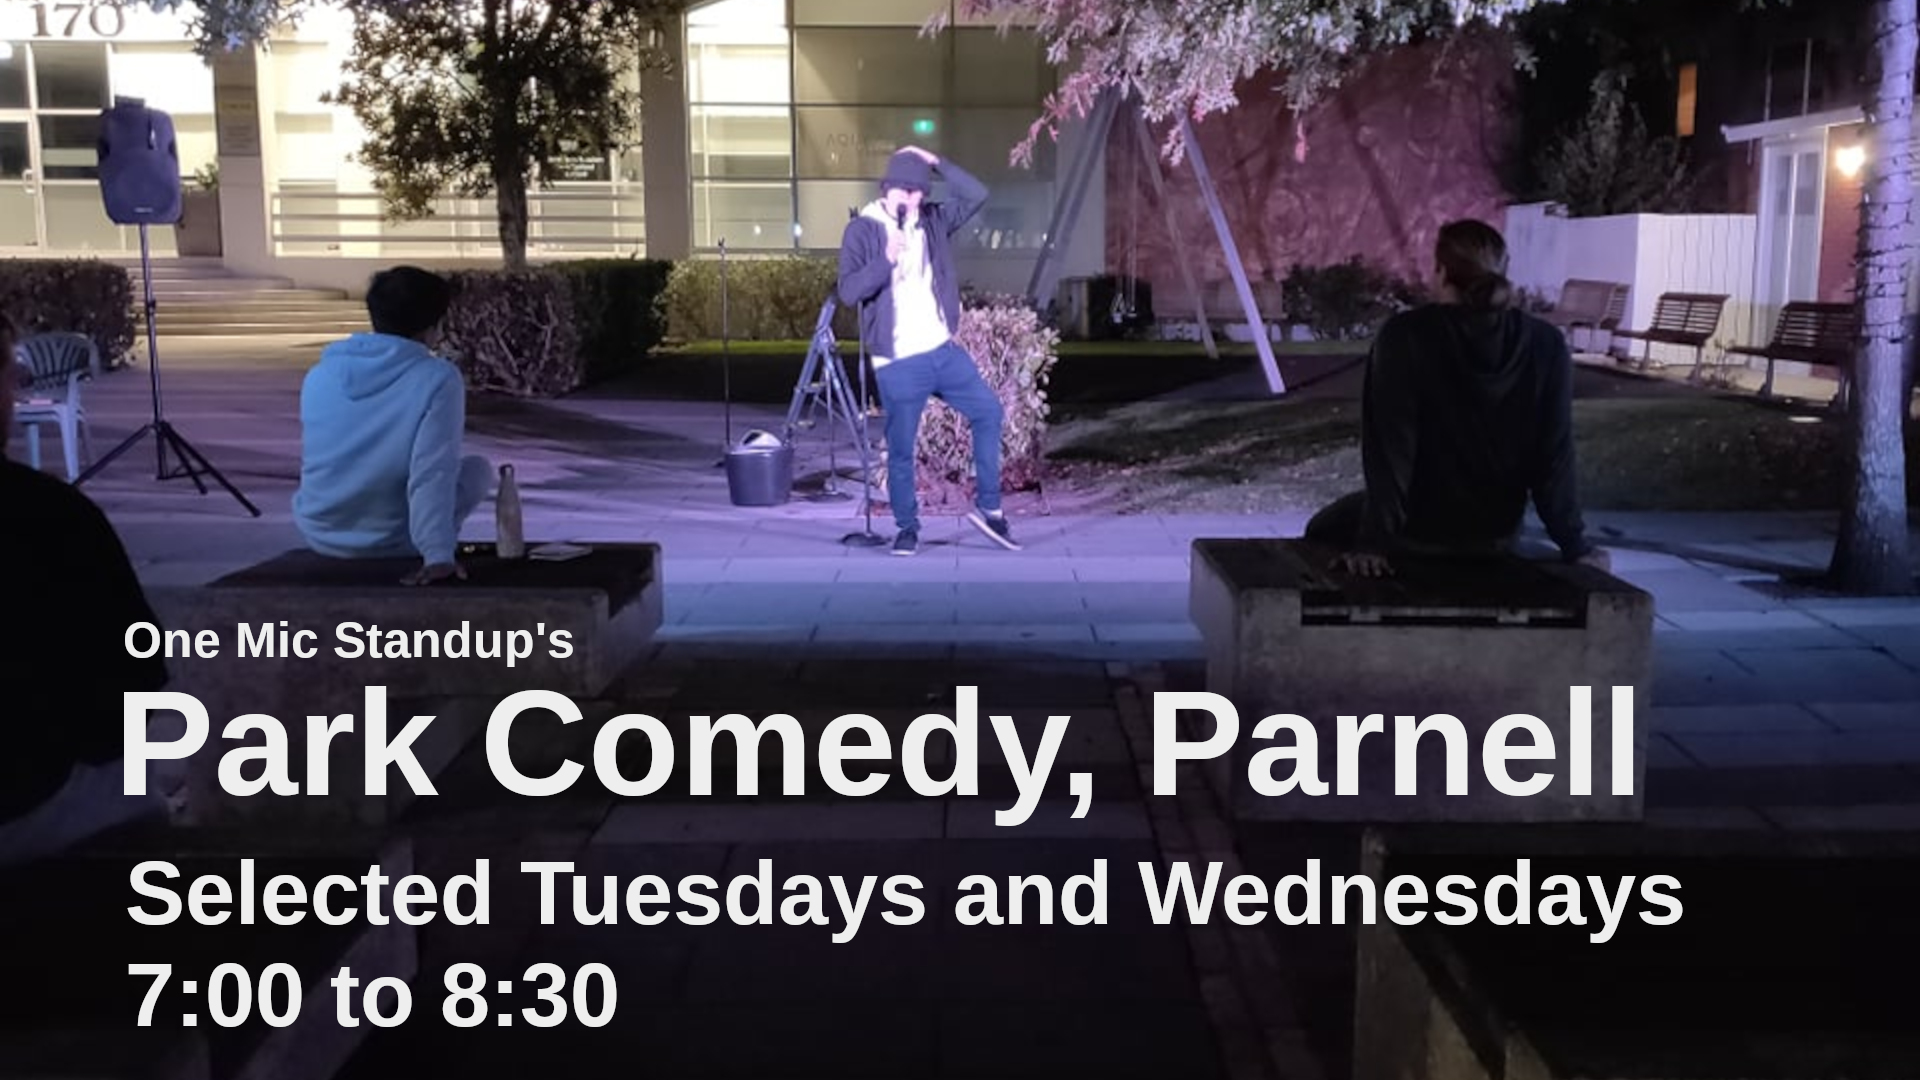 At night a comedian performs in a park.